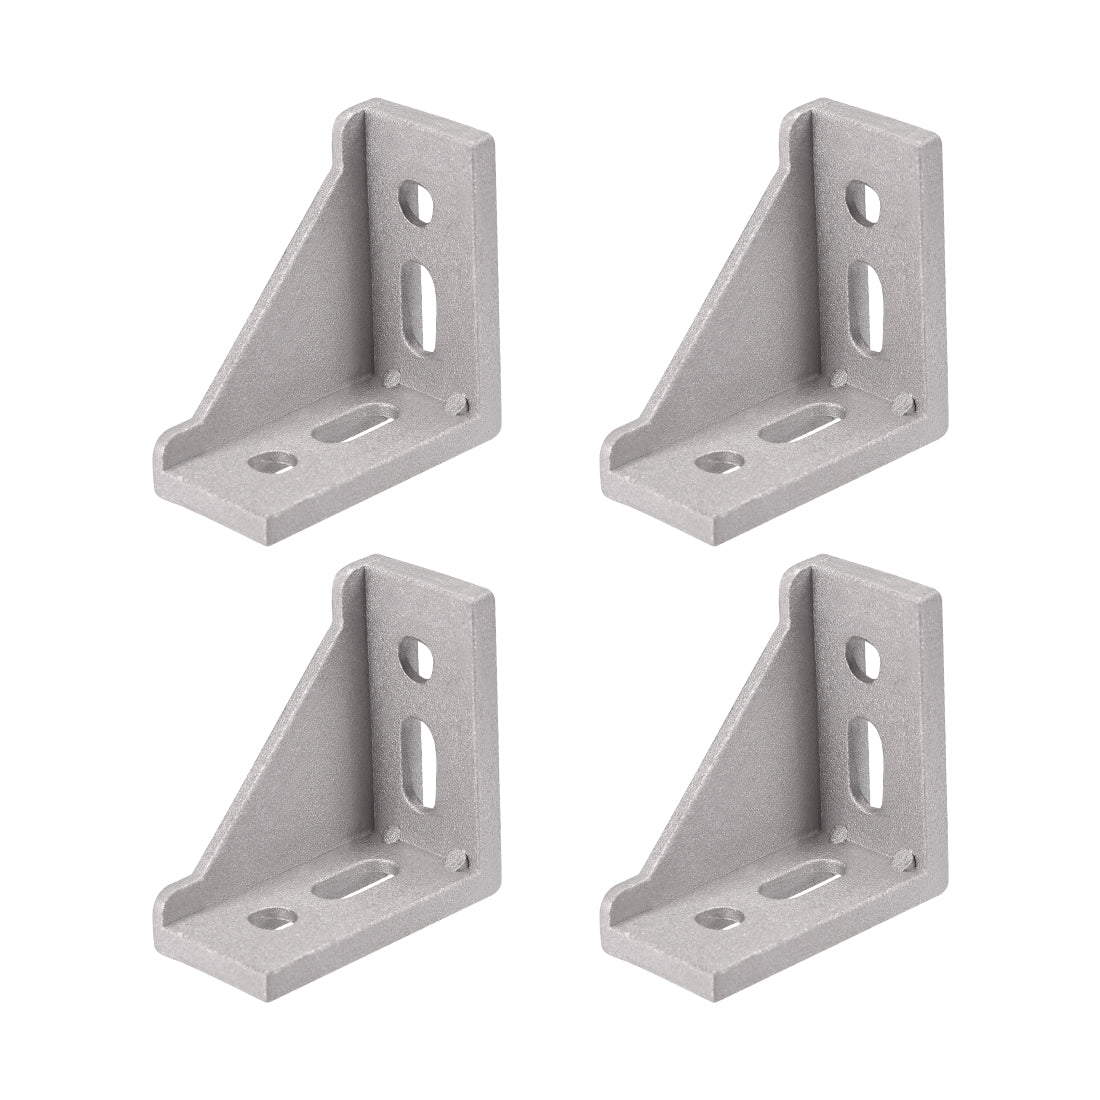 uxcell Uxcell Inside Corner Bracket Gusset, 60mm x 60mm for 3030 Series Aluminum Extrusion Profile with Slot 8mm, 4 Pcs (Silver)